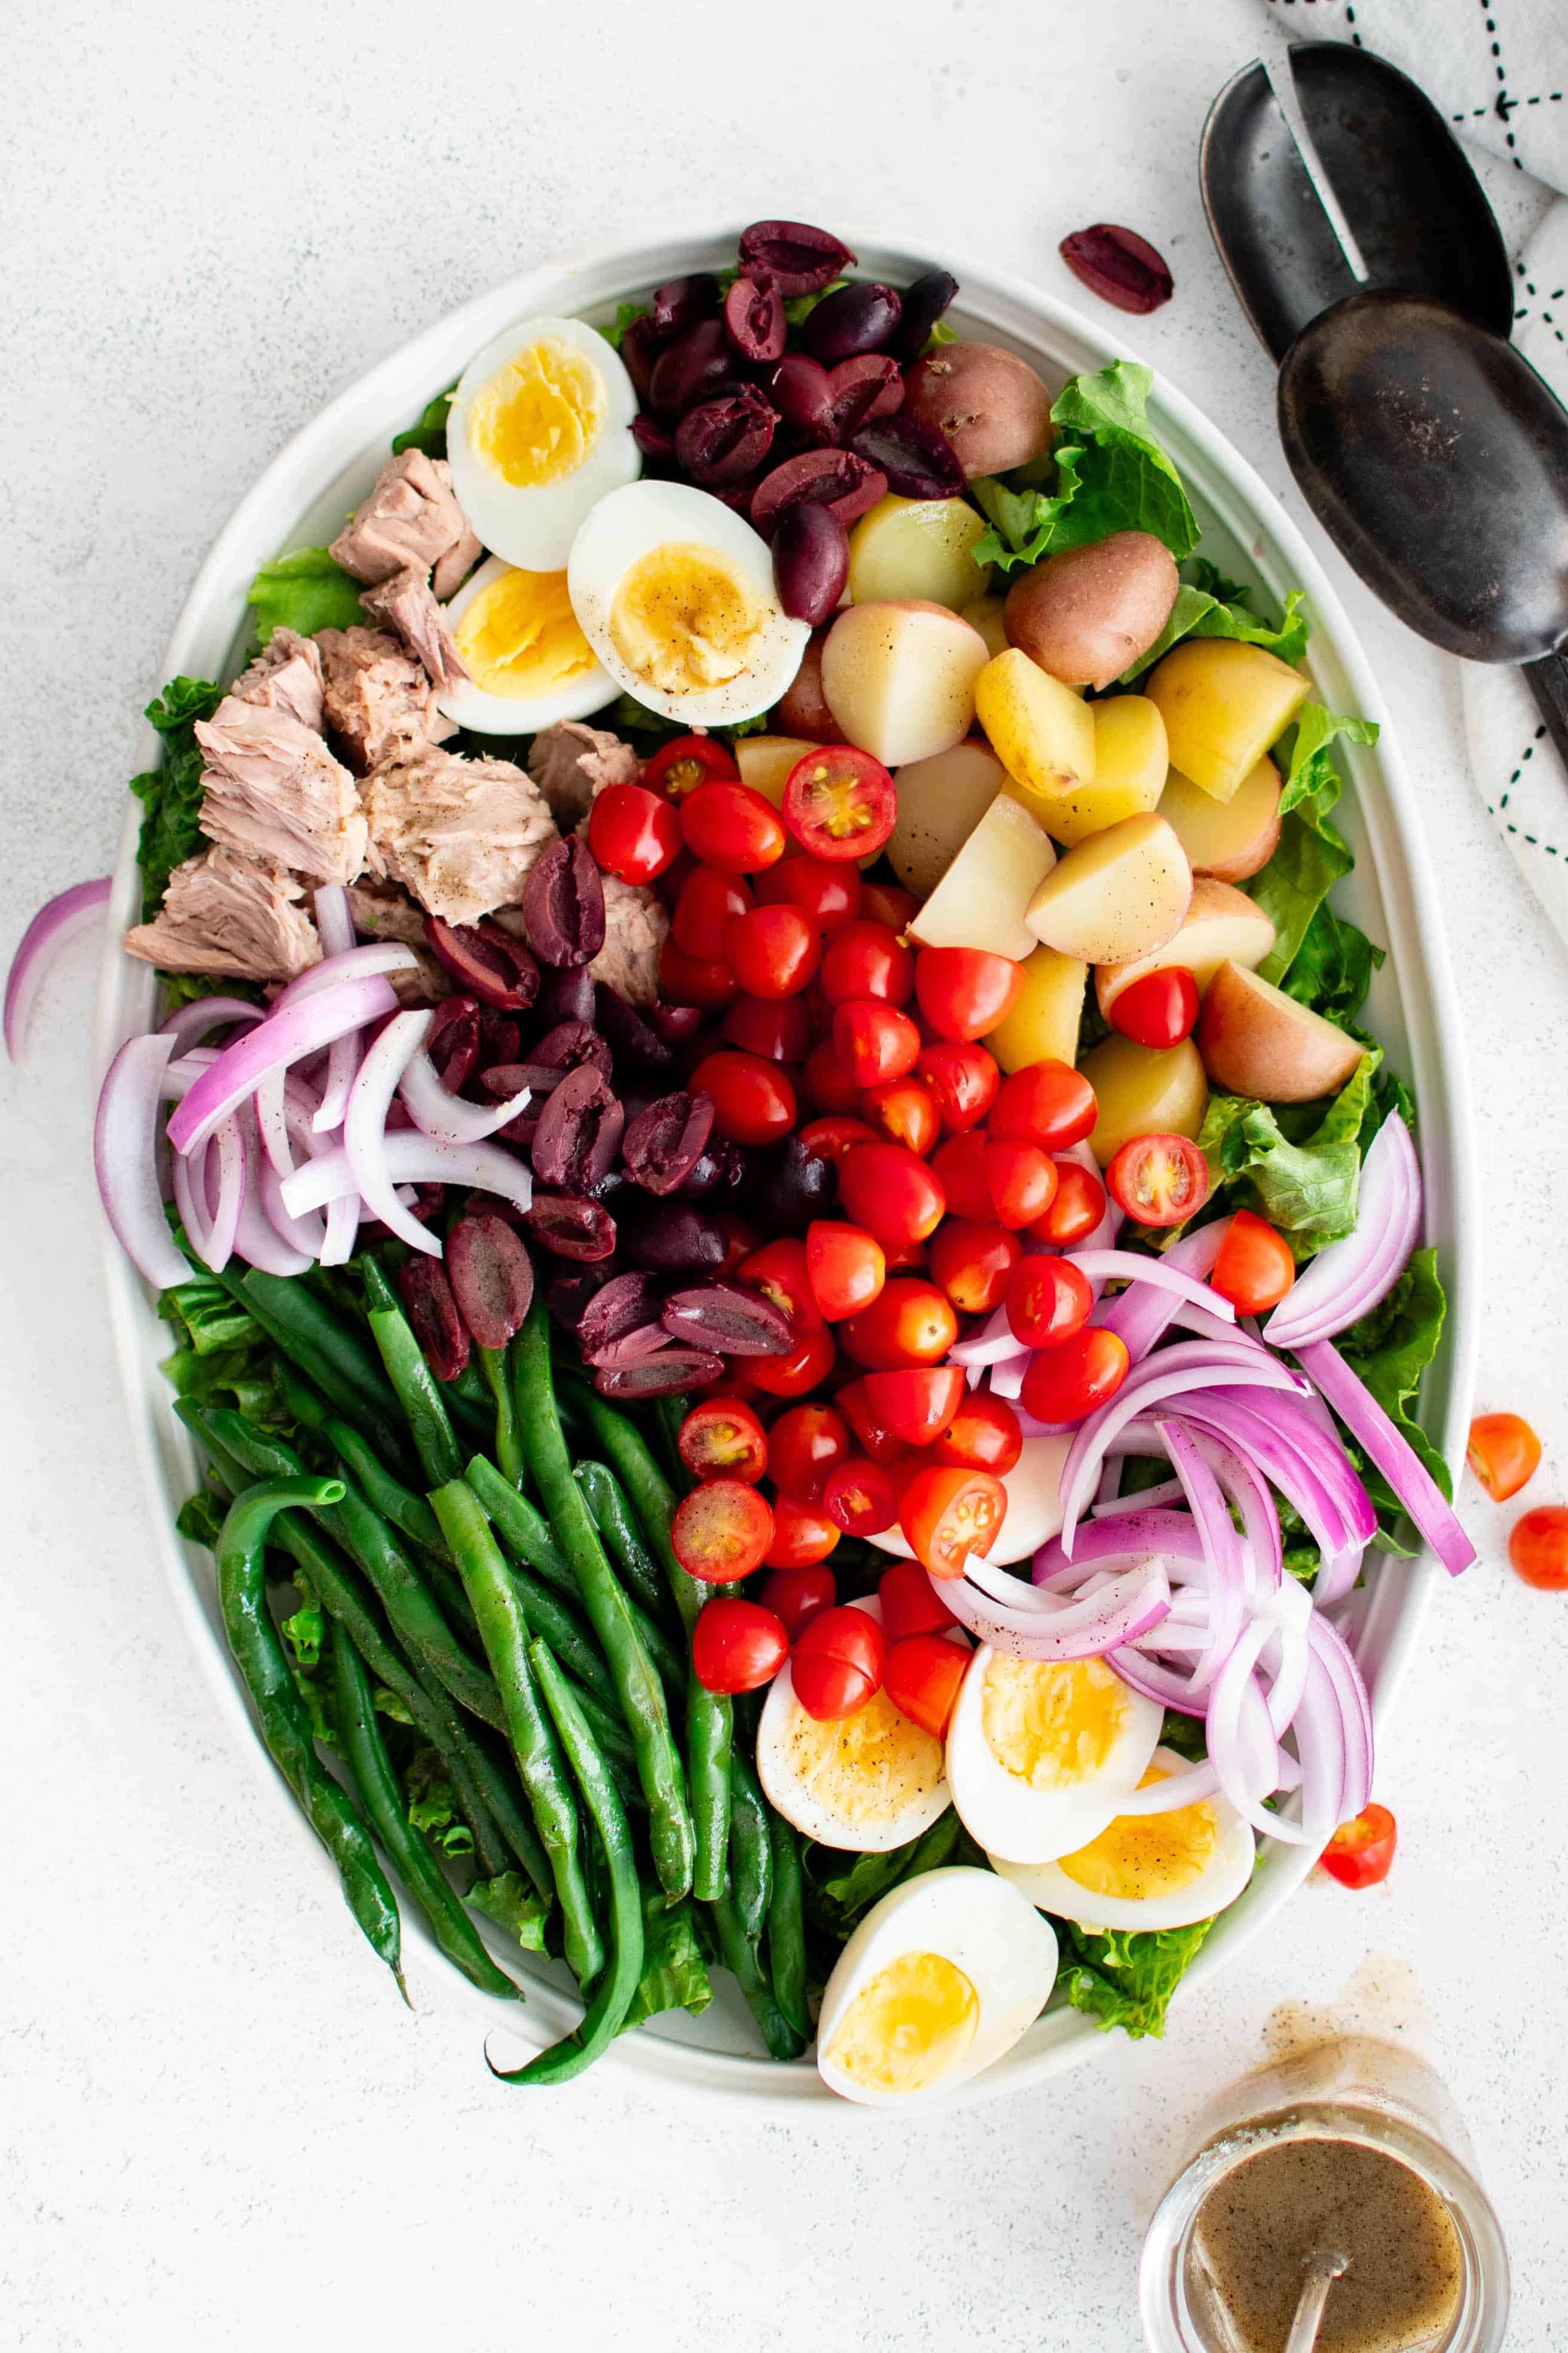 Large oval salad platter artfully displaying a tuna nicoise salad with green beans, hard-boiled eggs, sliced green onions, boiled potatoes, canned tuna, olives, and tomatoes on a bed of lettuce.